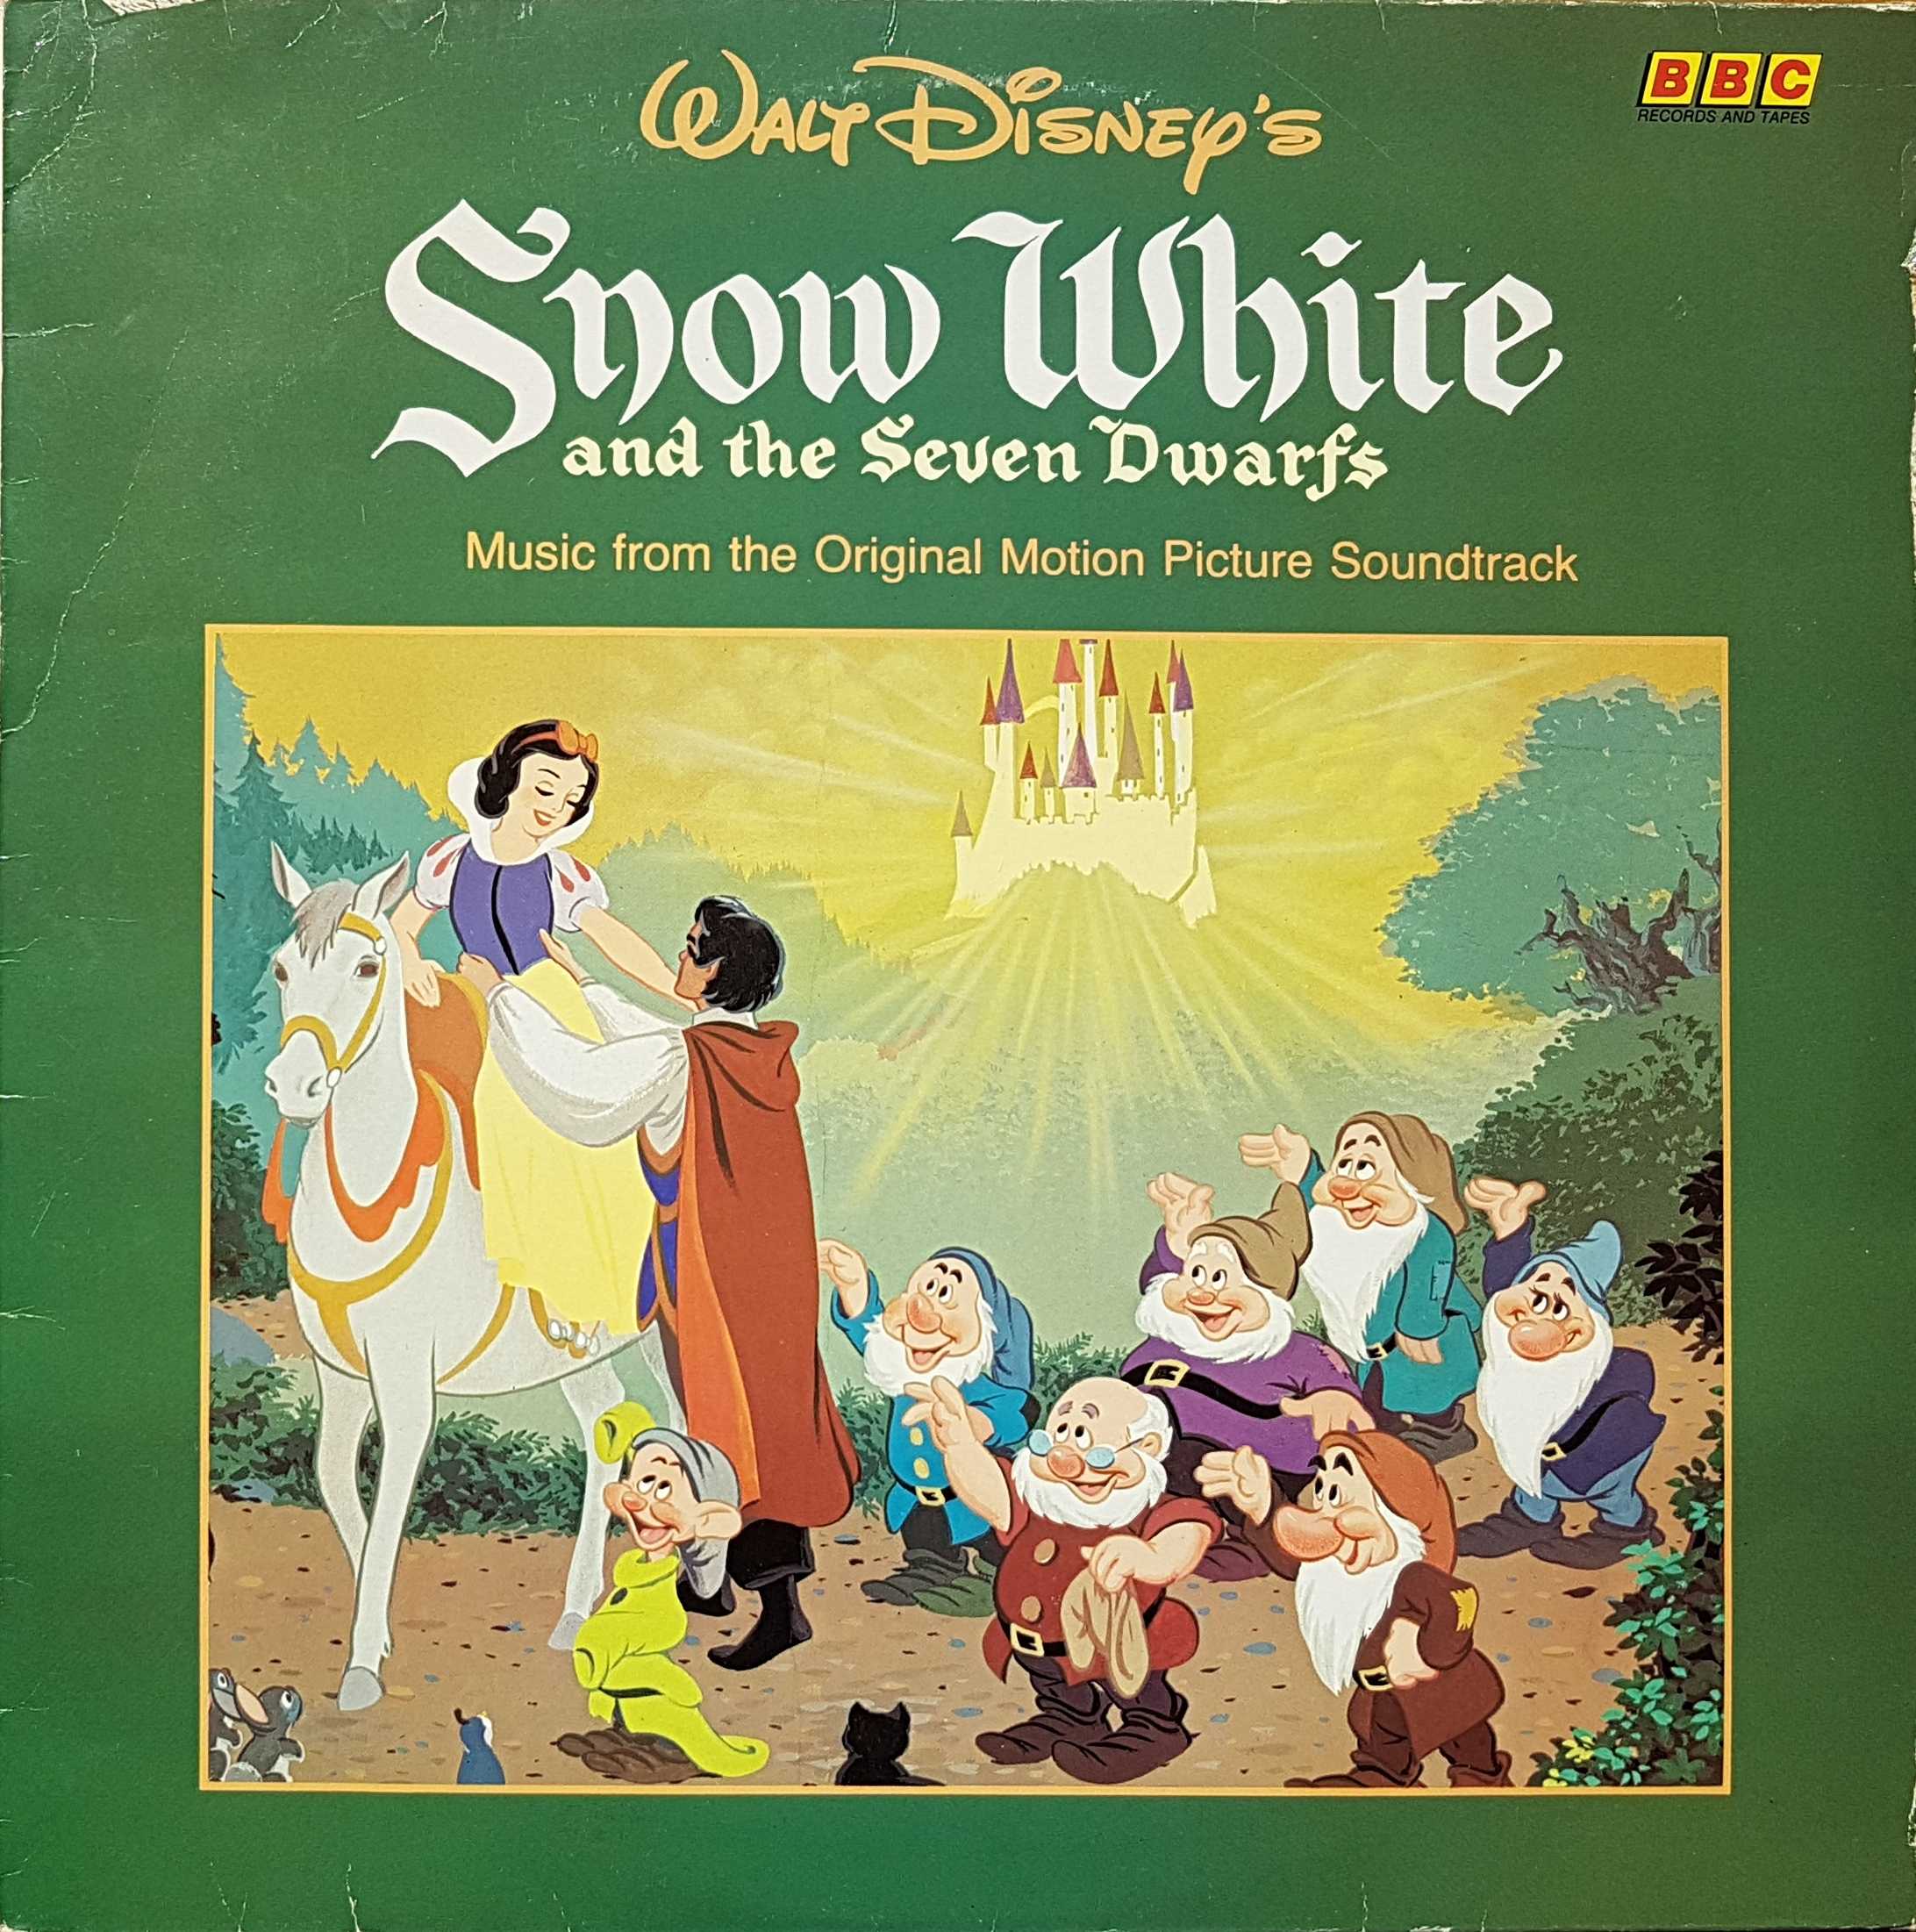 Picture of REC 539 Snow White and the seven dwarfs by artist Larry Morey / Frank Churchill / Leigh Harline / Paul J. Smith / Adriana Caselotti / Harry Stickwell from the BBC albums - Records and Tapes library